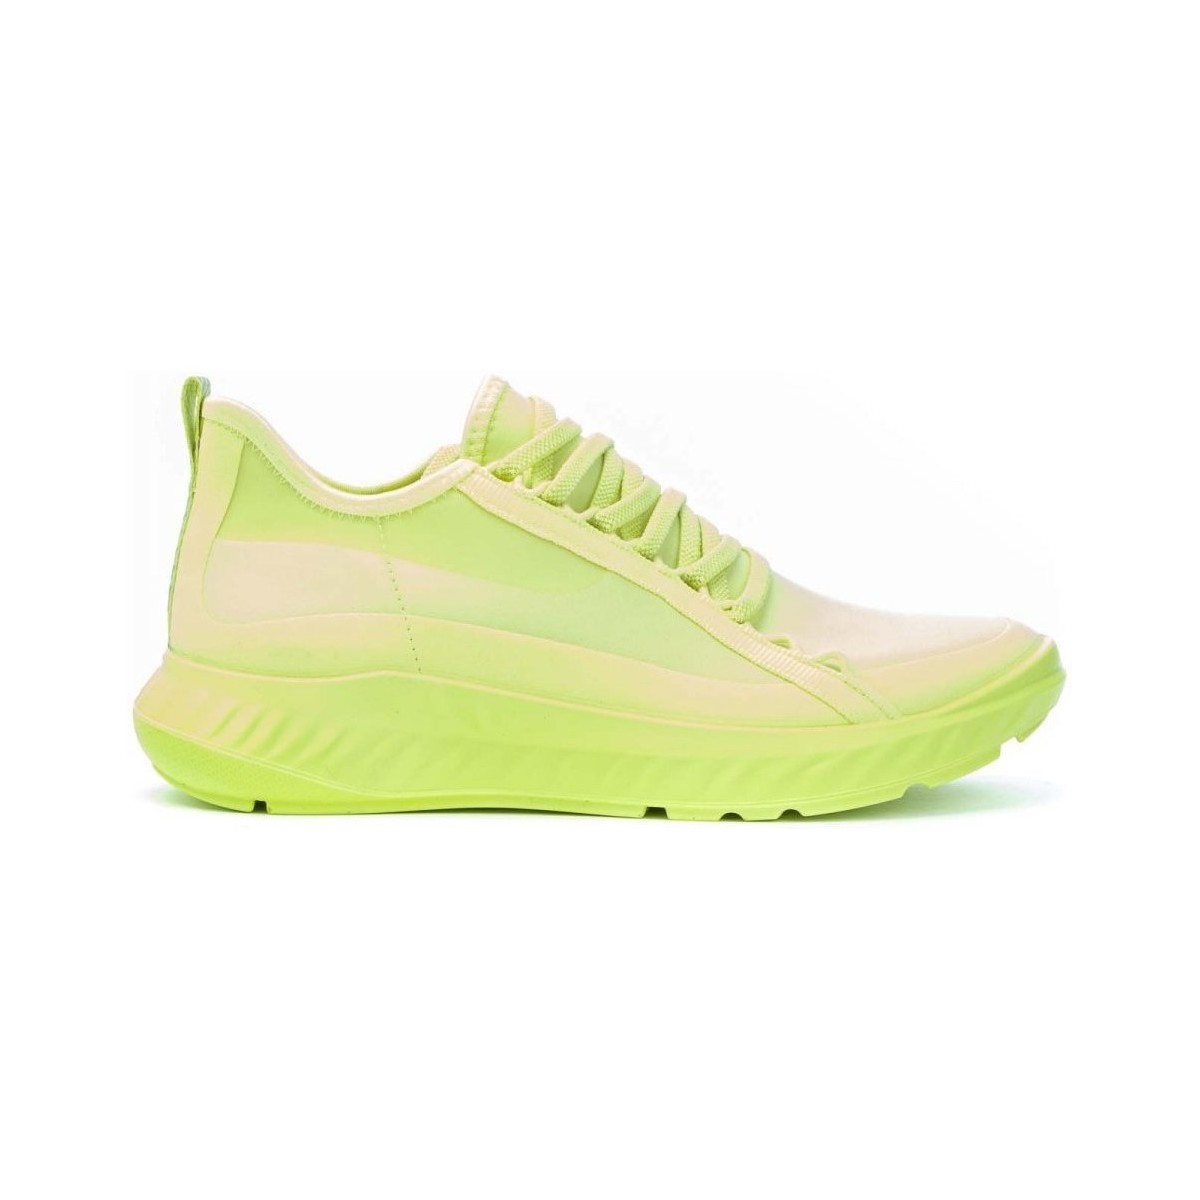 Scarpe Donna Trekking Ecco 834703 Ath 1fw Sneakers Stretch leone Shoes Lime